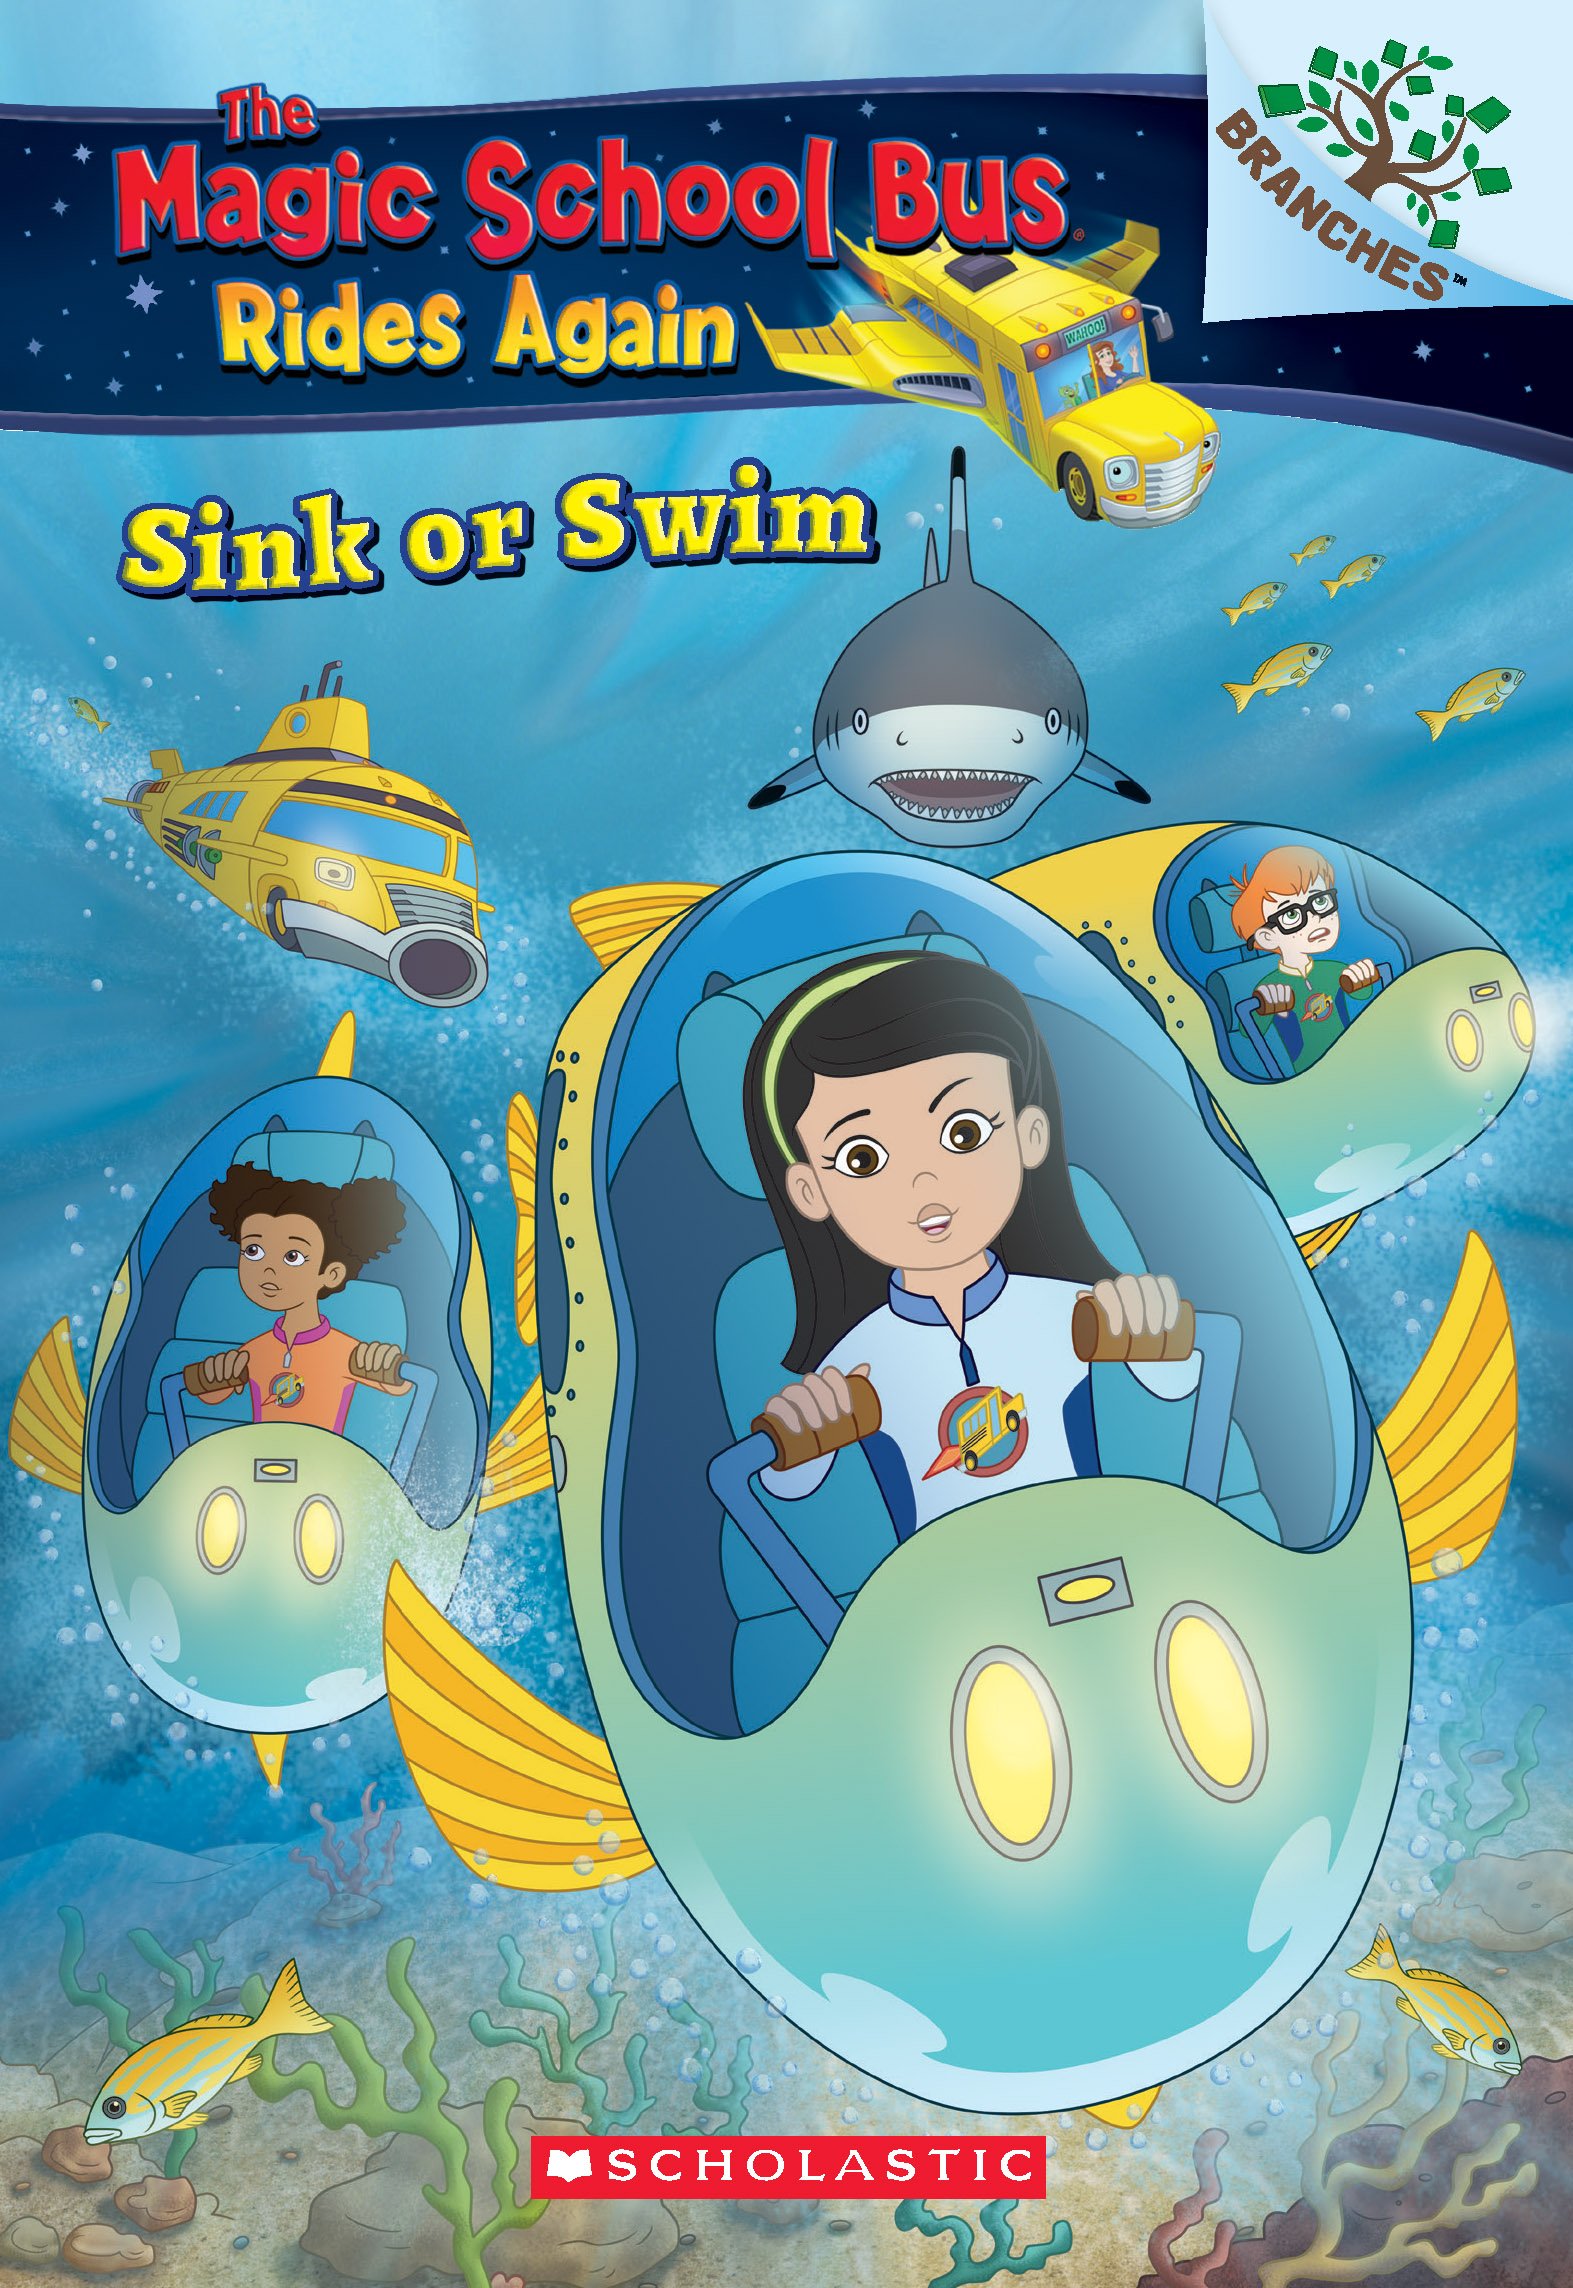 IMG : The Magic School Bus Rides Again Sink or Swim Branches